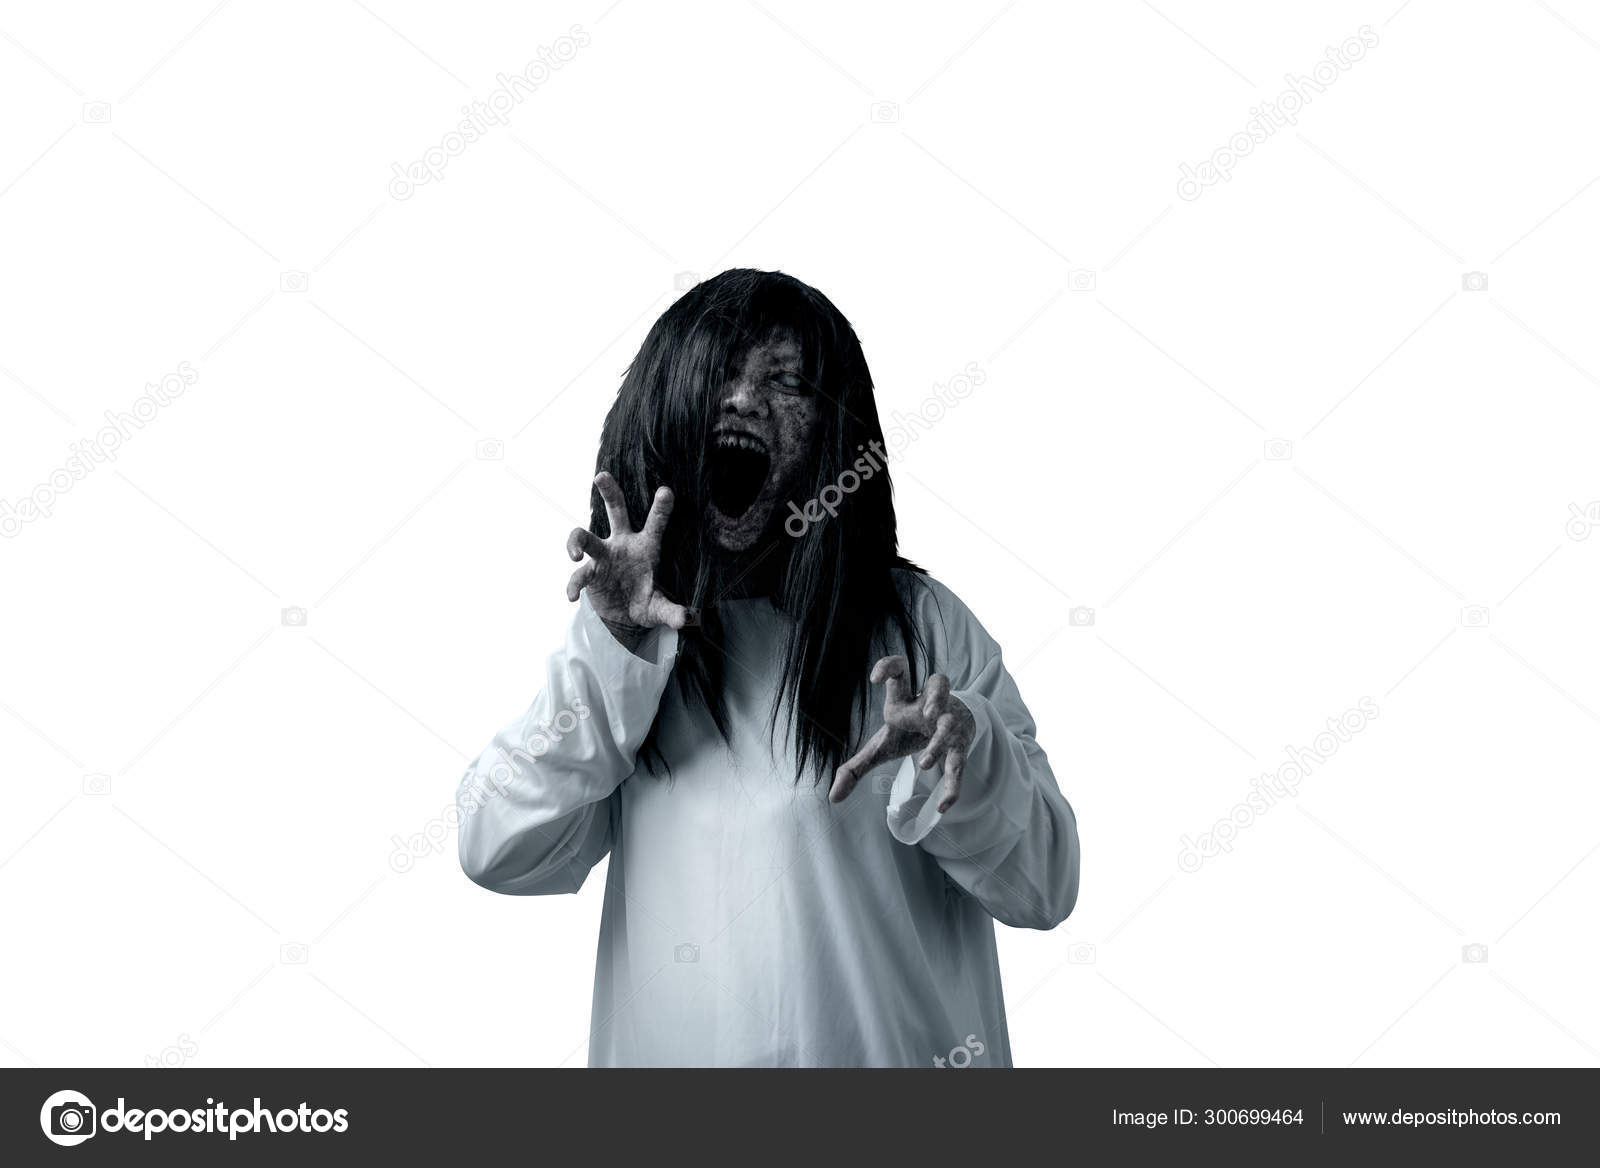 Scary momo isolated over white background. Scary face for